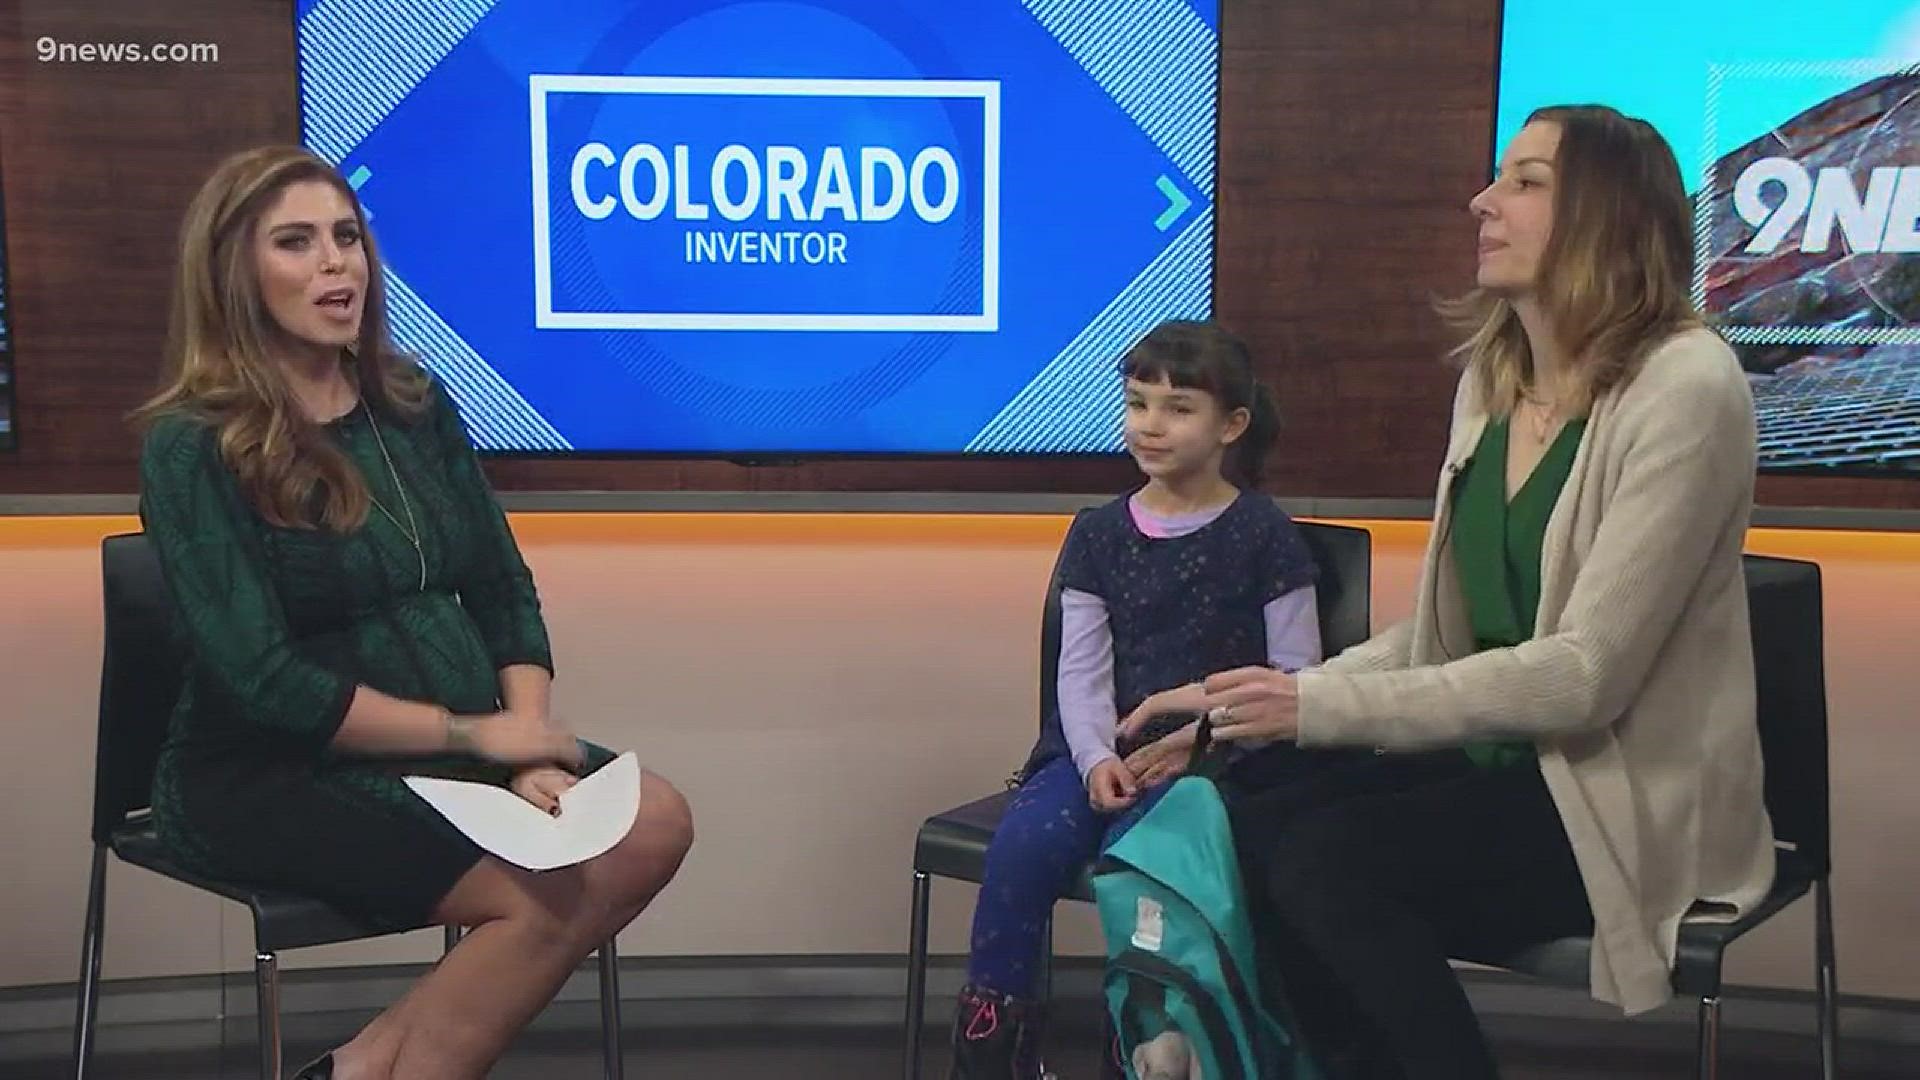 A young Colorado inventor stops by the 9news studio to show her backpack design aimed to make school more fun for other children.